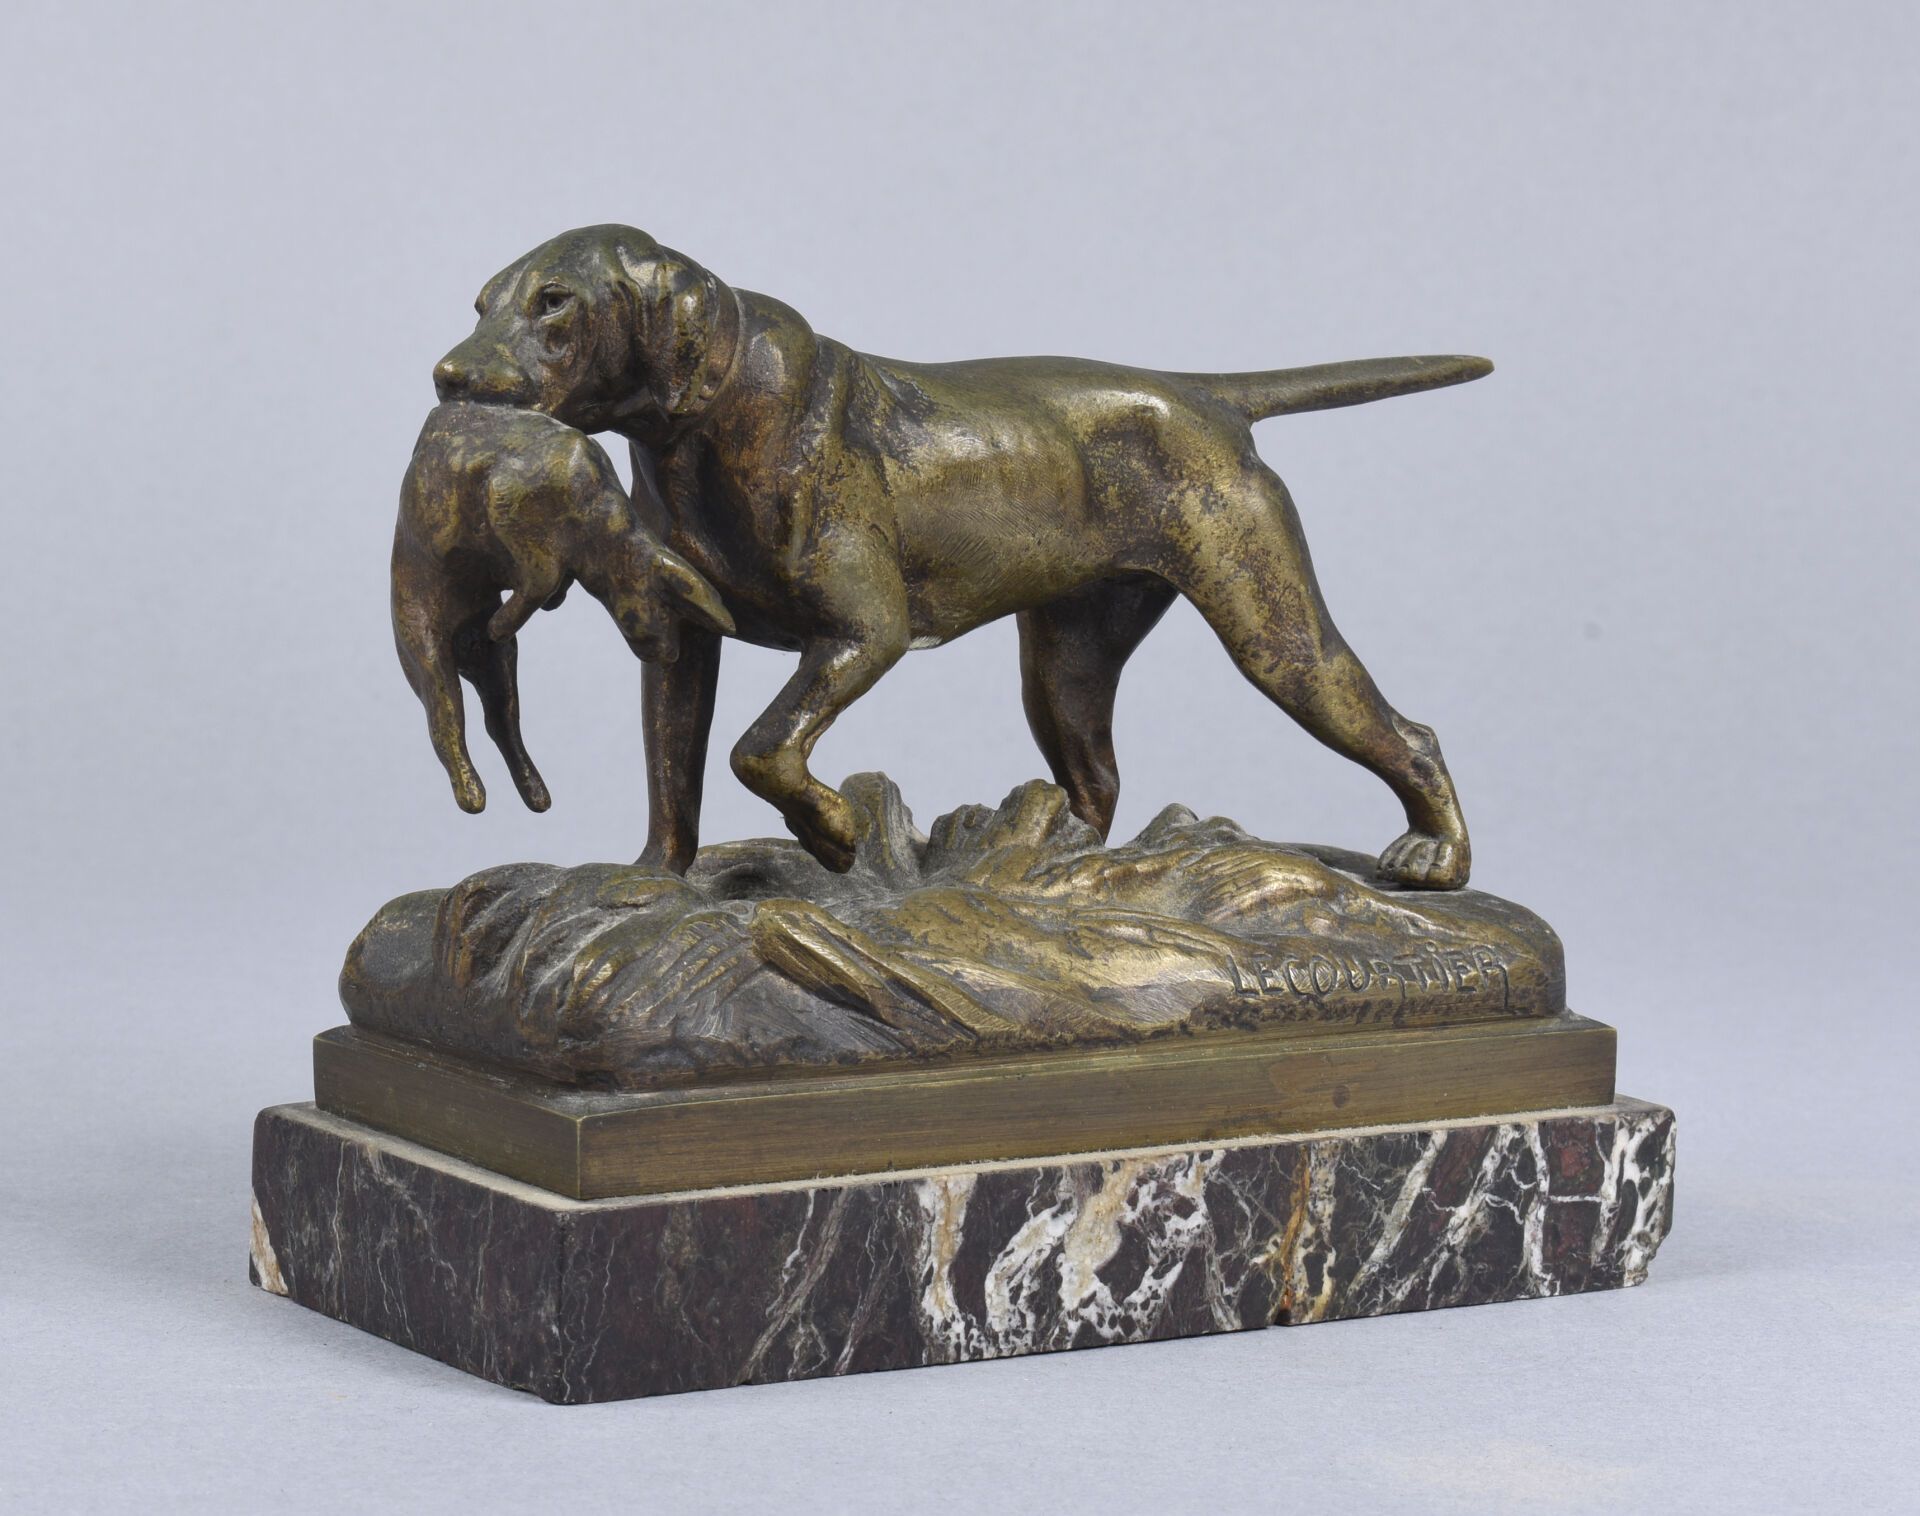 Null LECOURTIER Prosper (1851-1924)
"Hunting dog bringing in a hare".
Subject in&hellip;